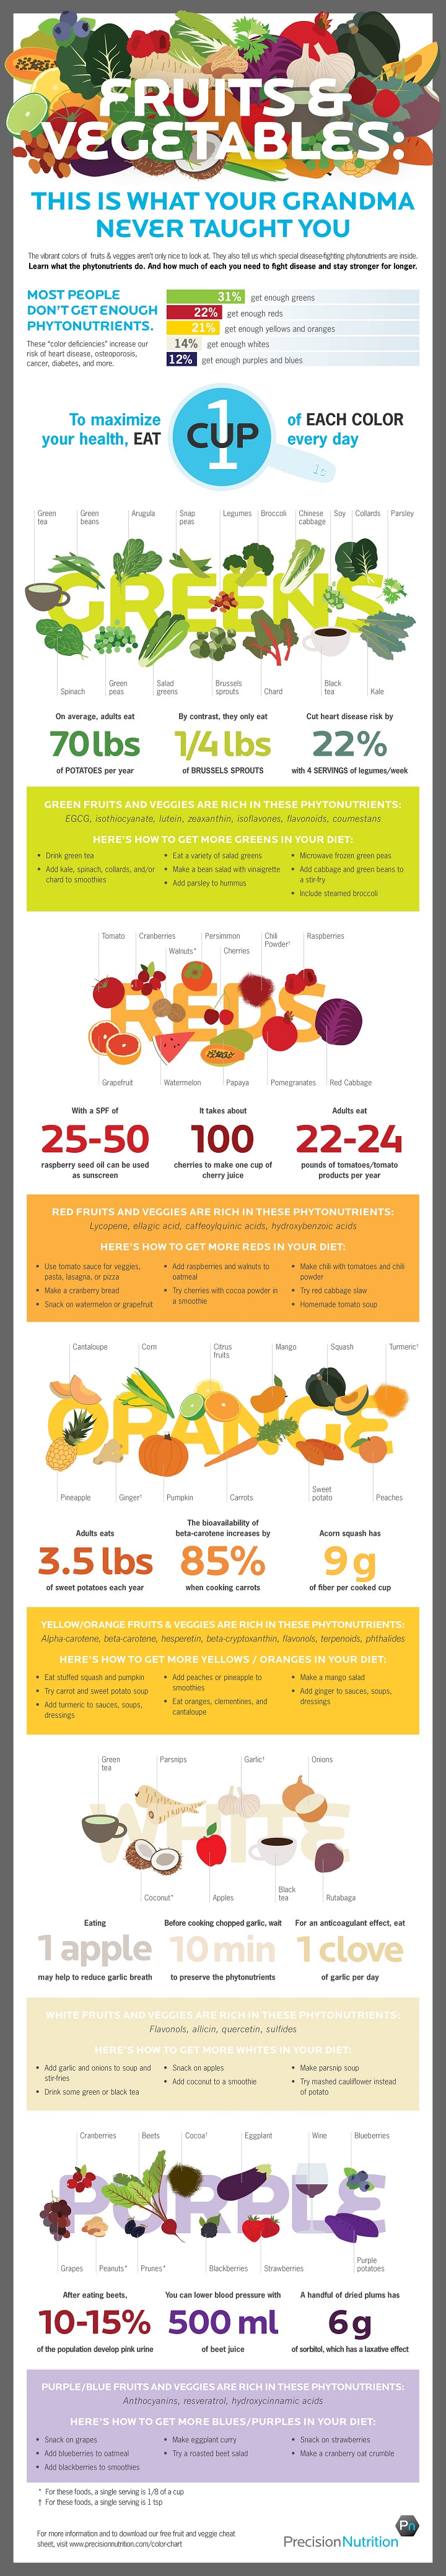 fruits and vegetables infographic